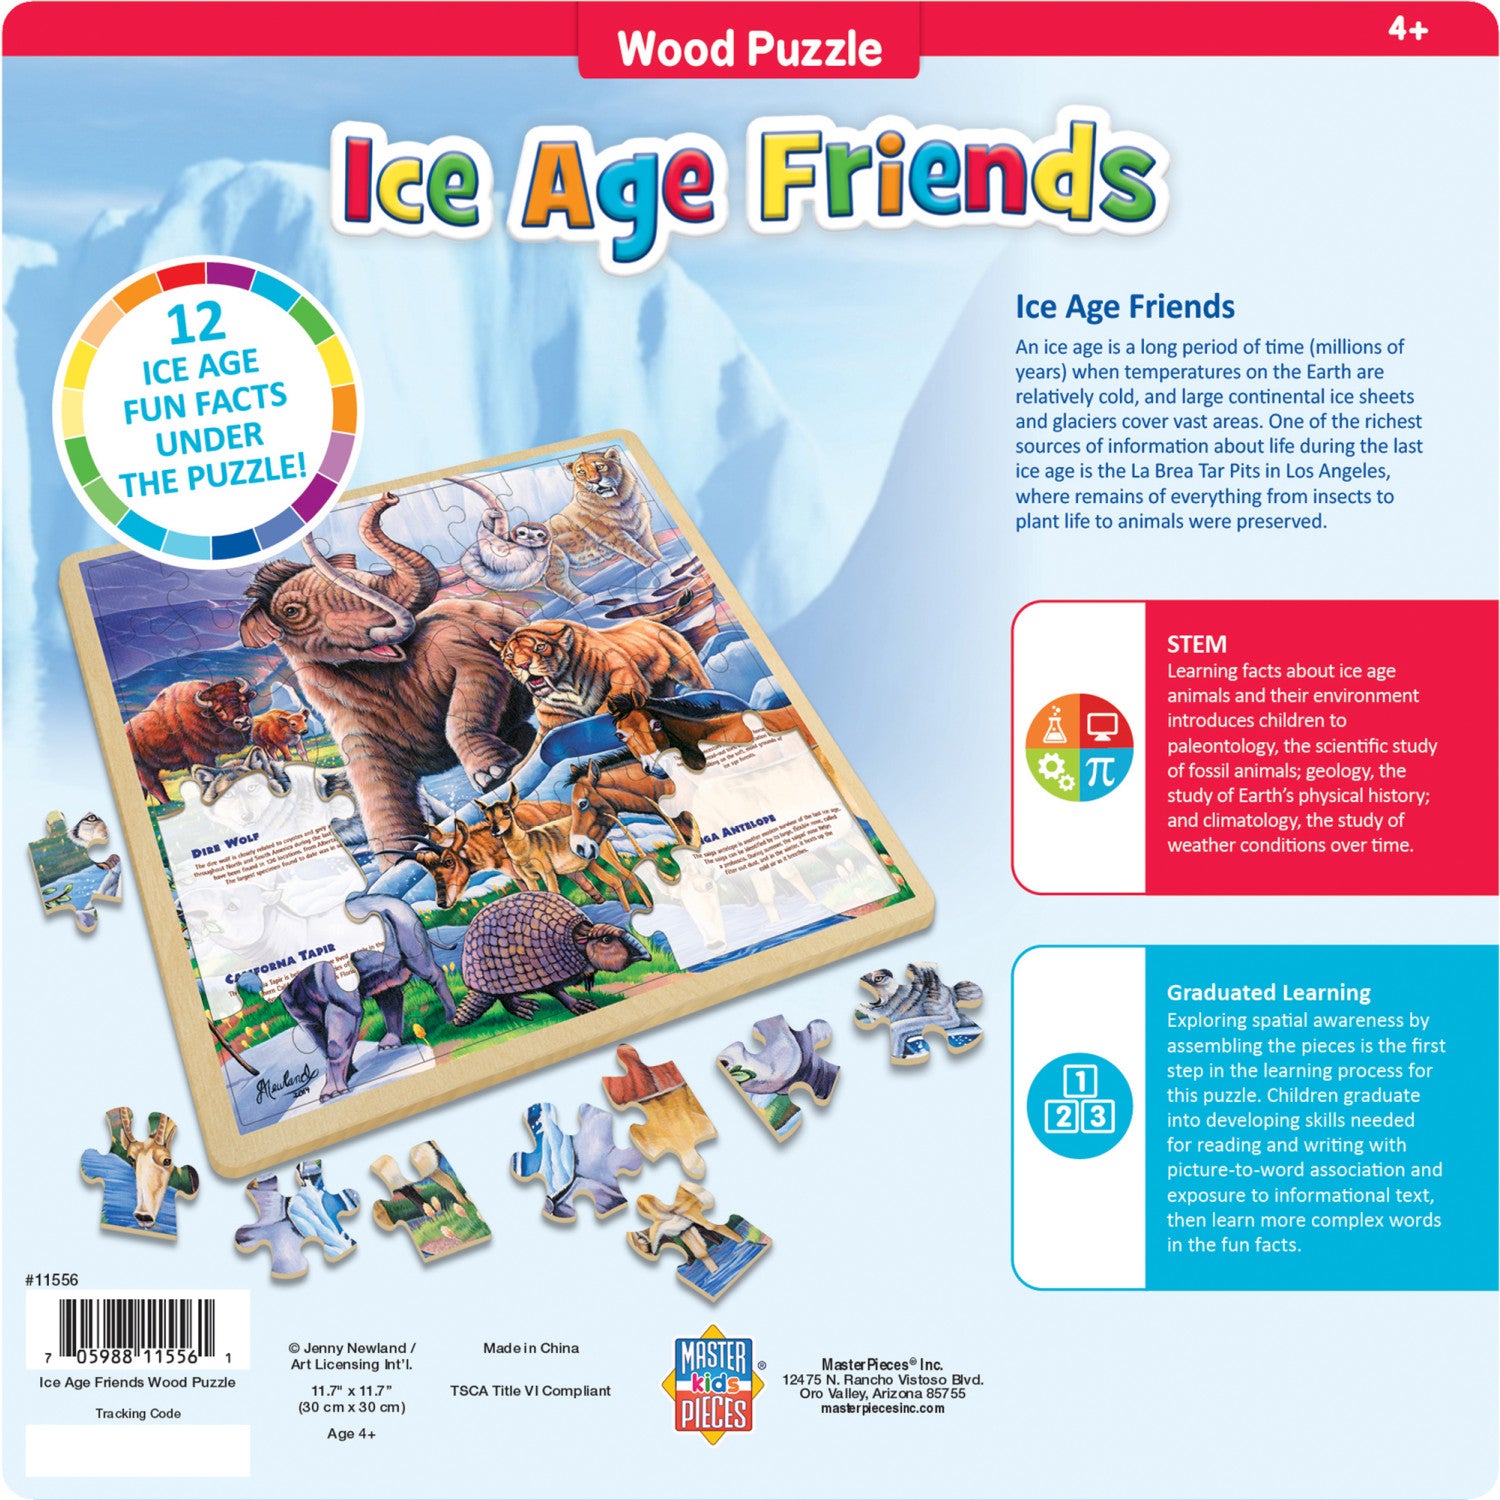 Wood Fun Facts - Ice Age Friends 48 Piece Wood Puzzle